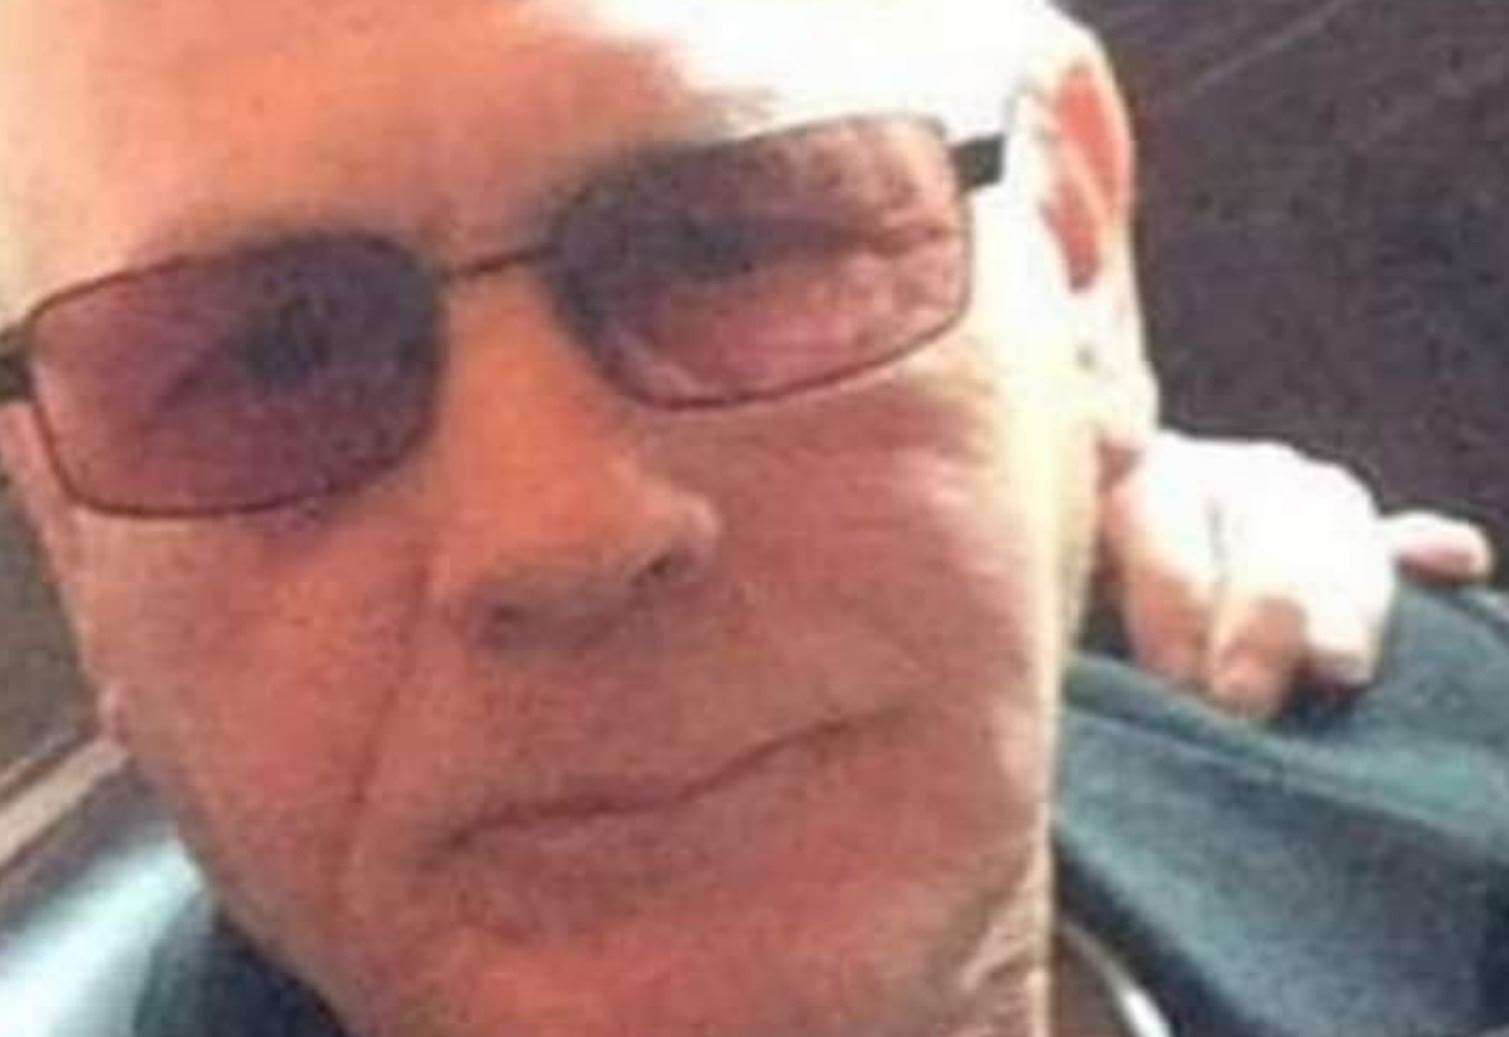 Paul Wakefield died in hospital after being stabbed at his home in Coolinge Lane, Folkestone. Picture: Facebook